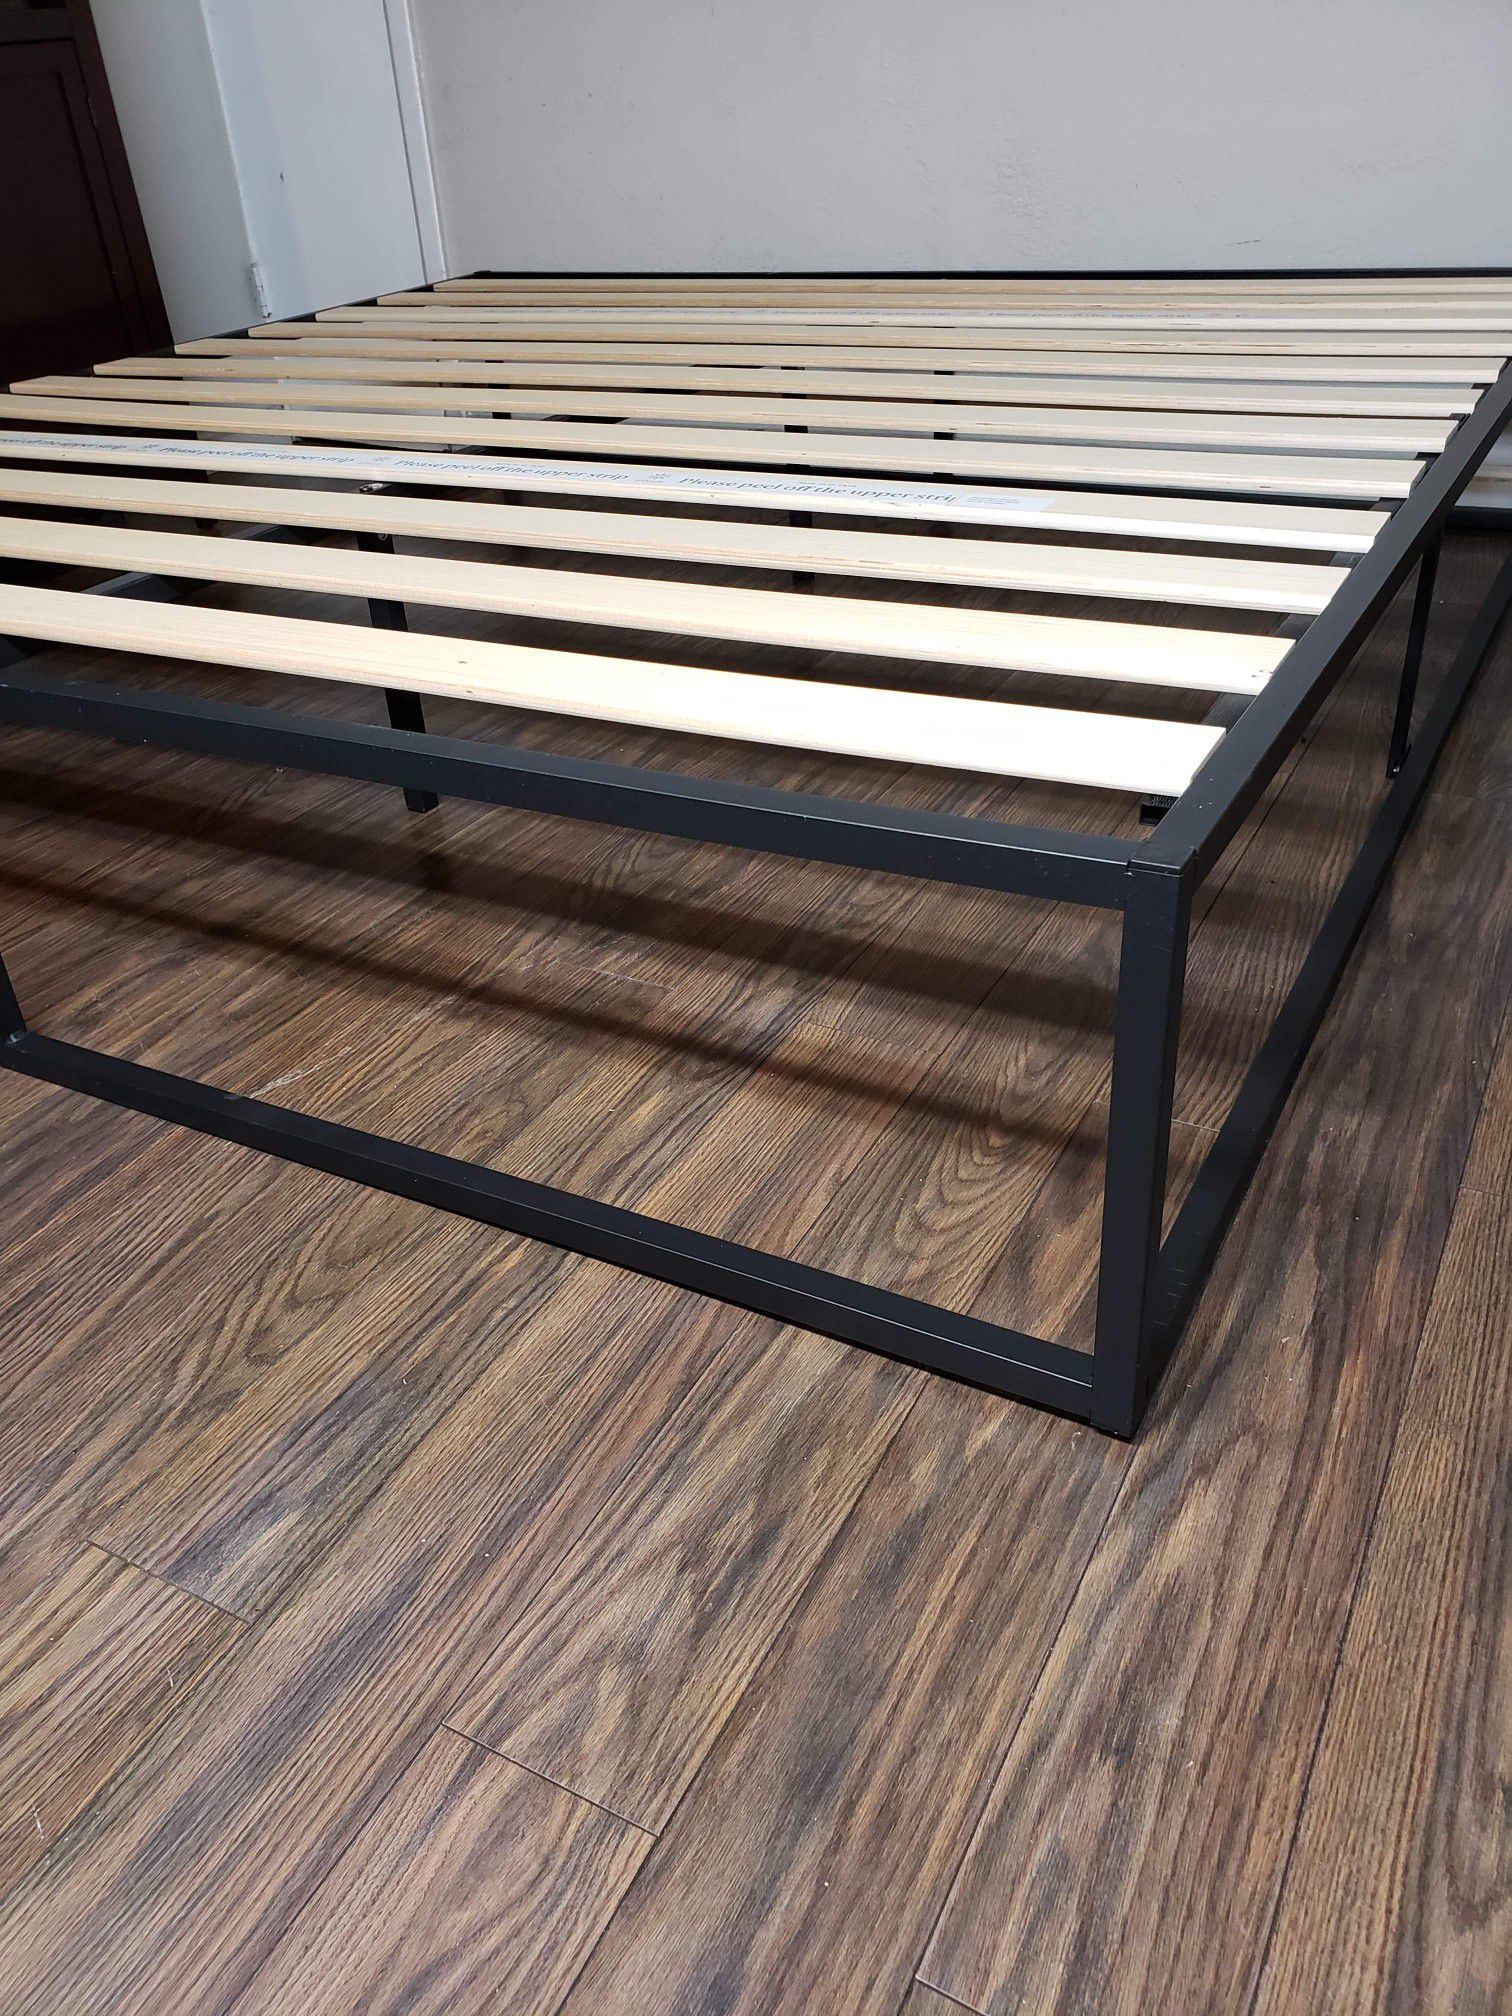 Platform bed frame Queen size. 18 " Tall. New. Free delivery in Modesto$75